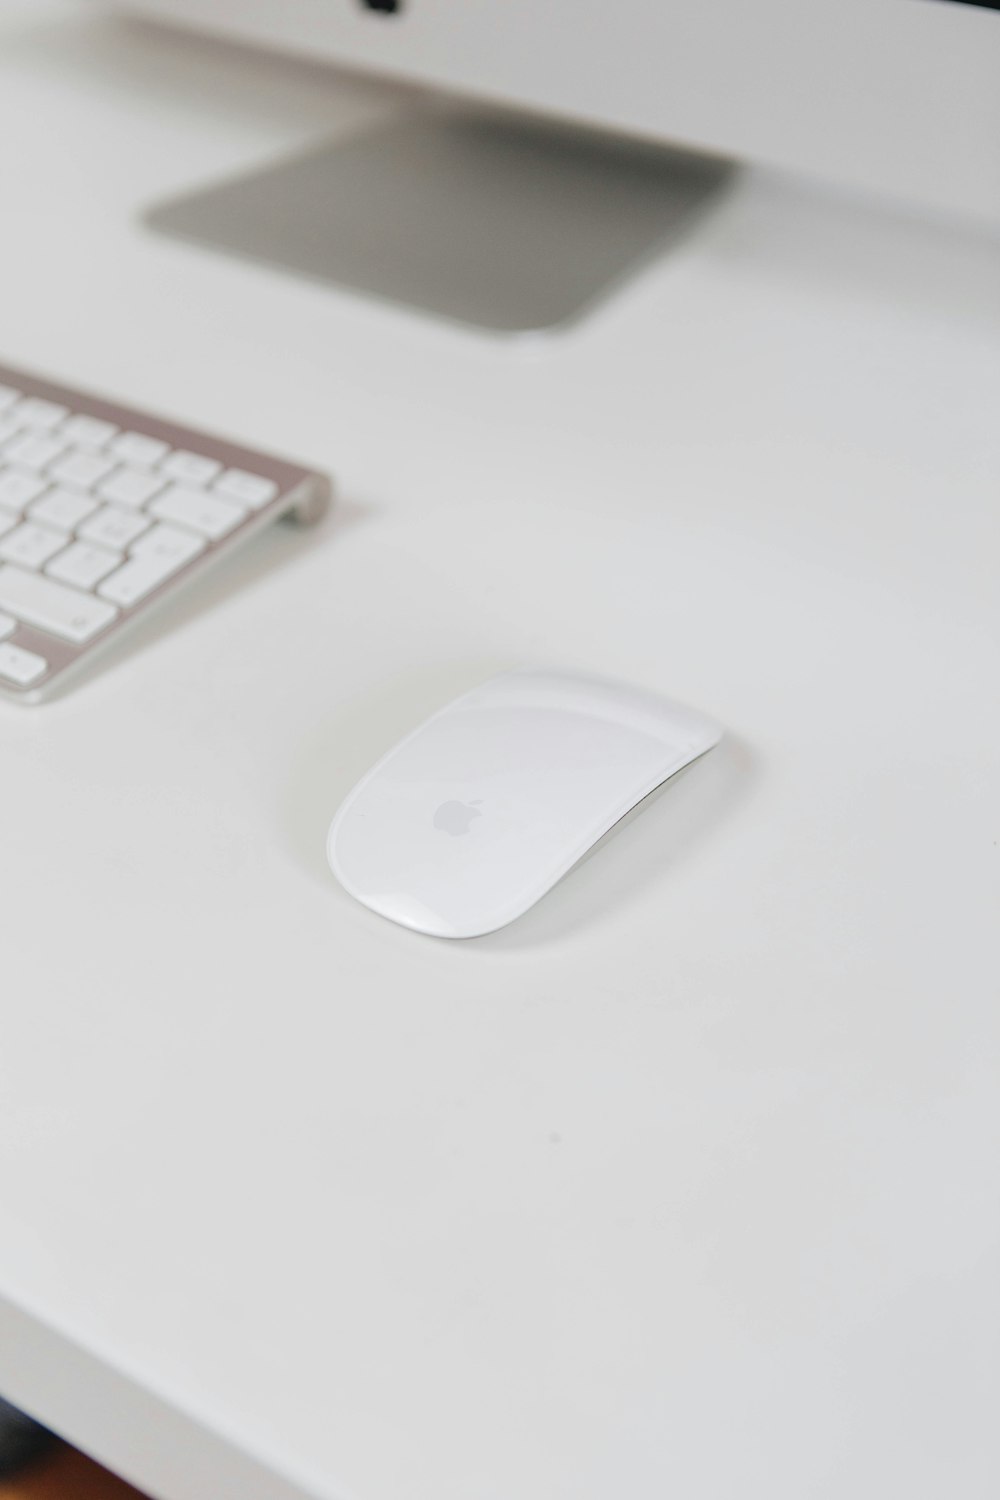 apple magic mouse on white table